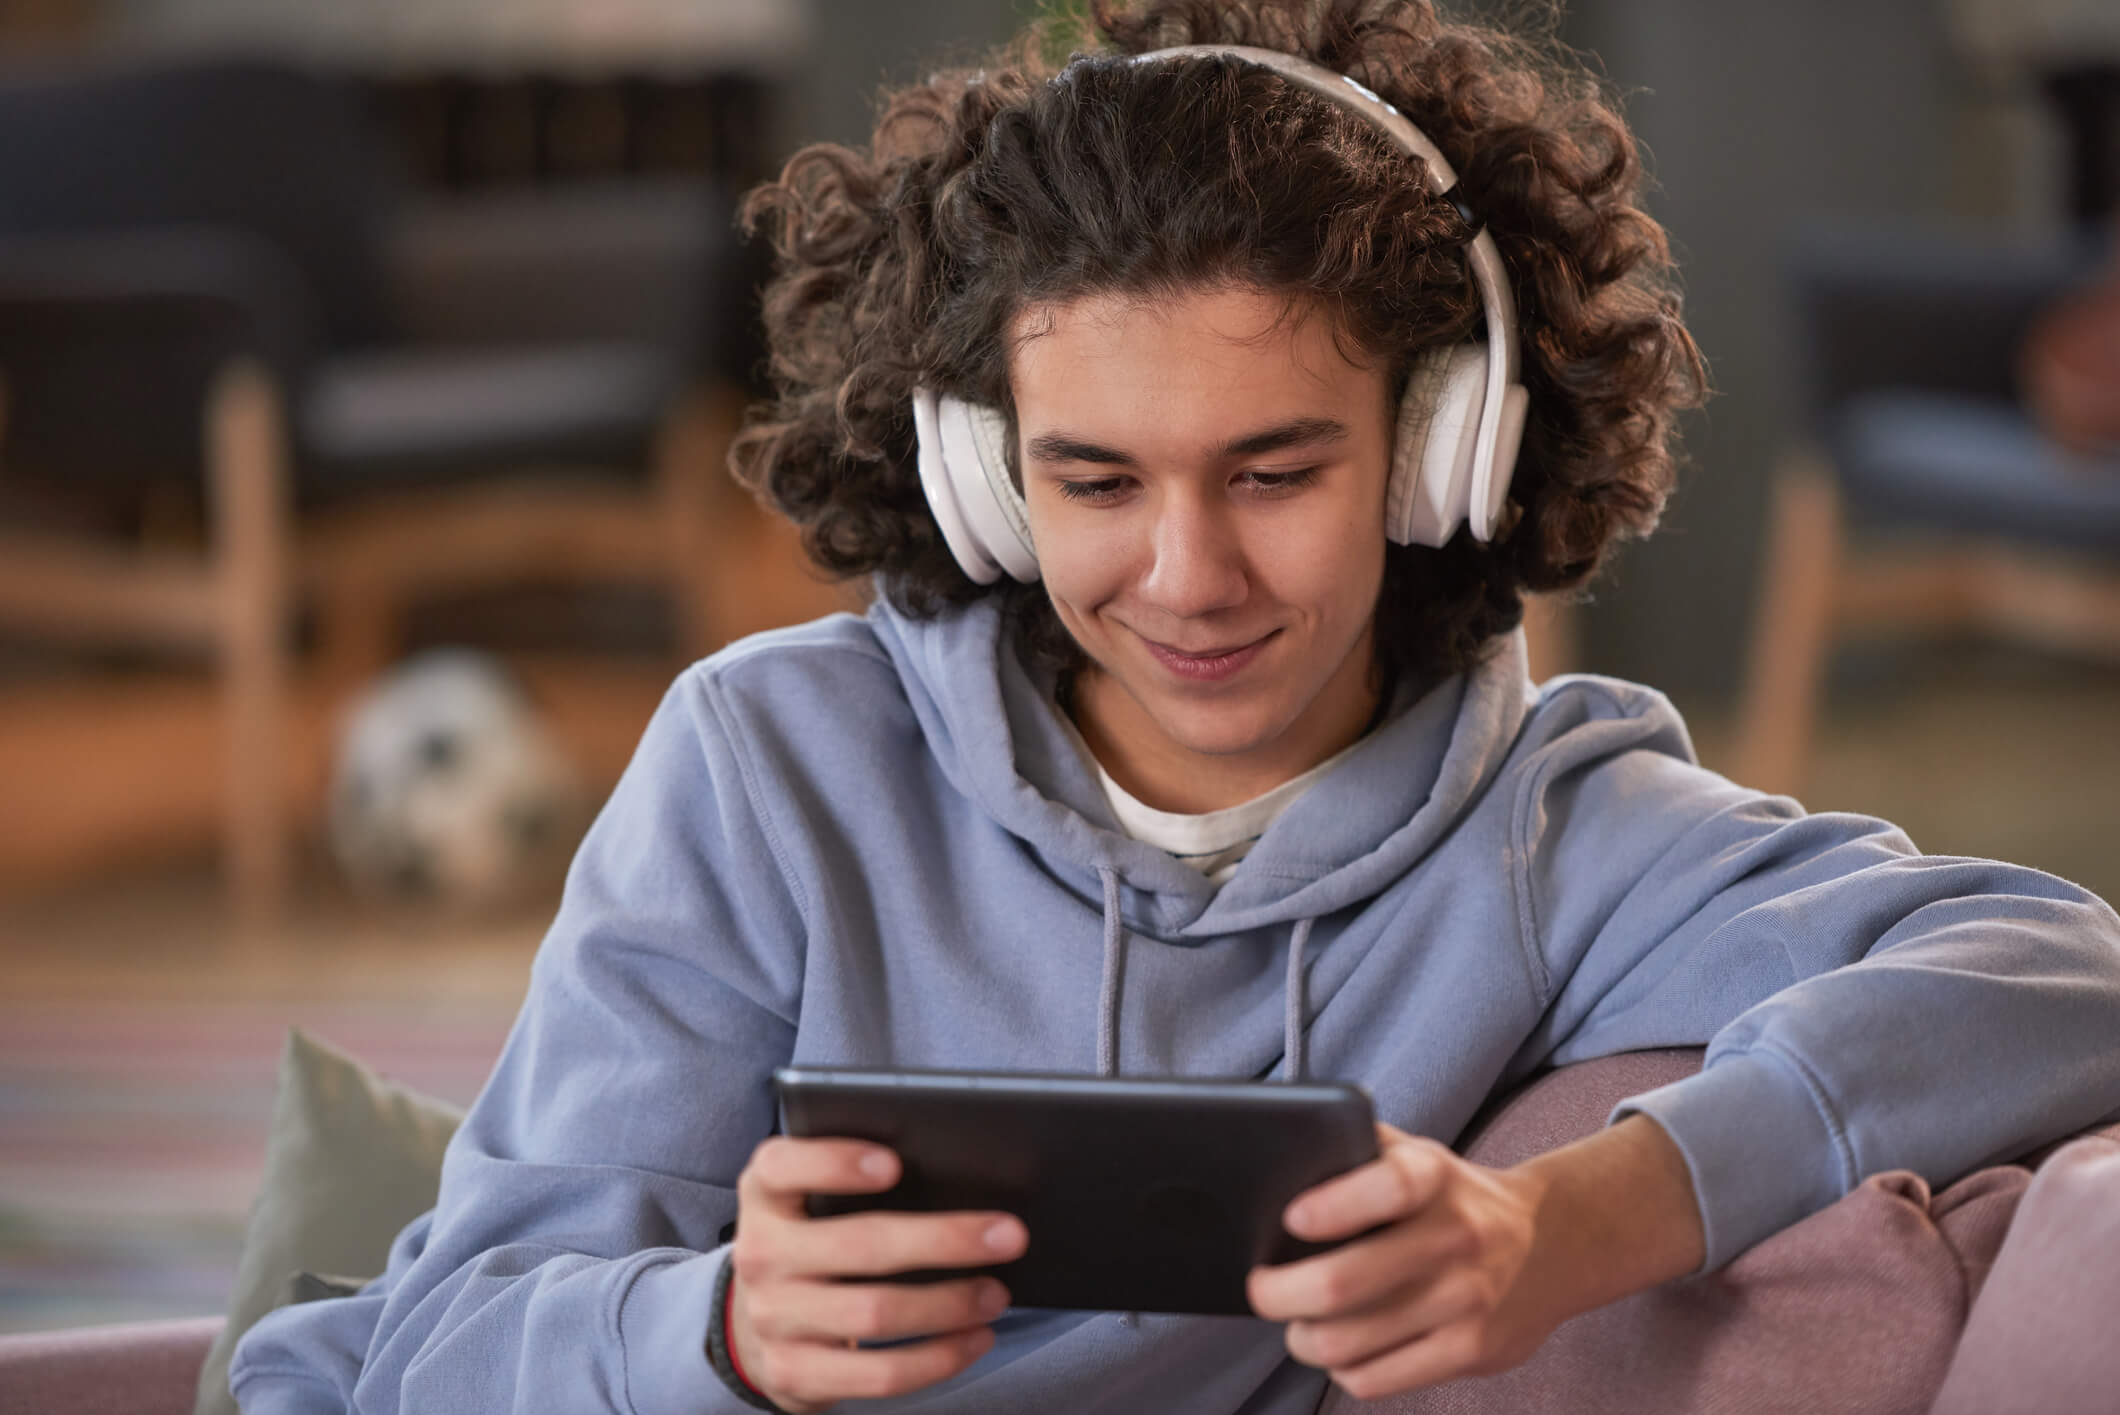 A teenager wearing headphones is sitting on a couch and using a tablet; he is also smiling.